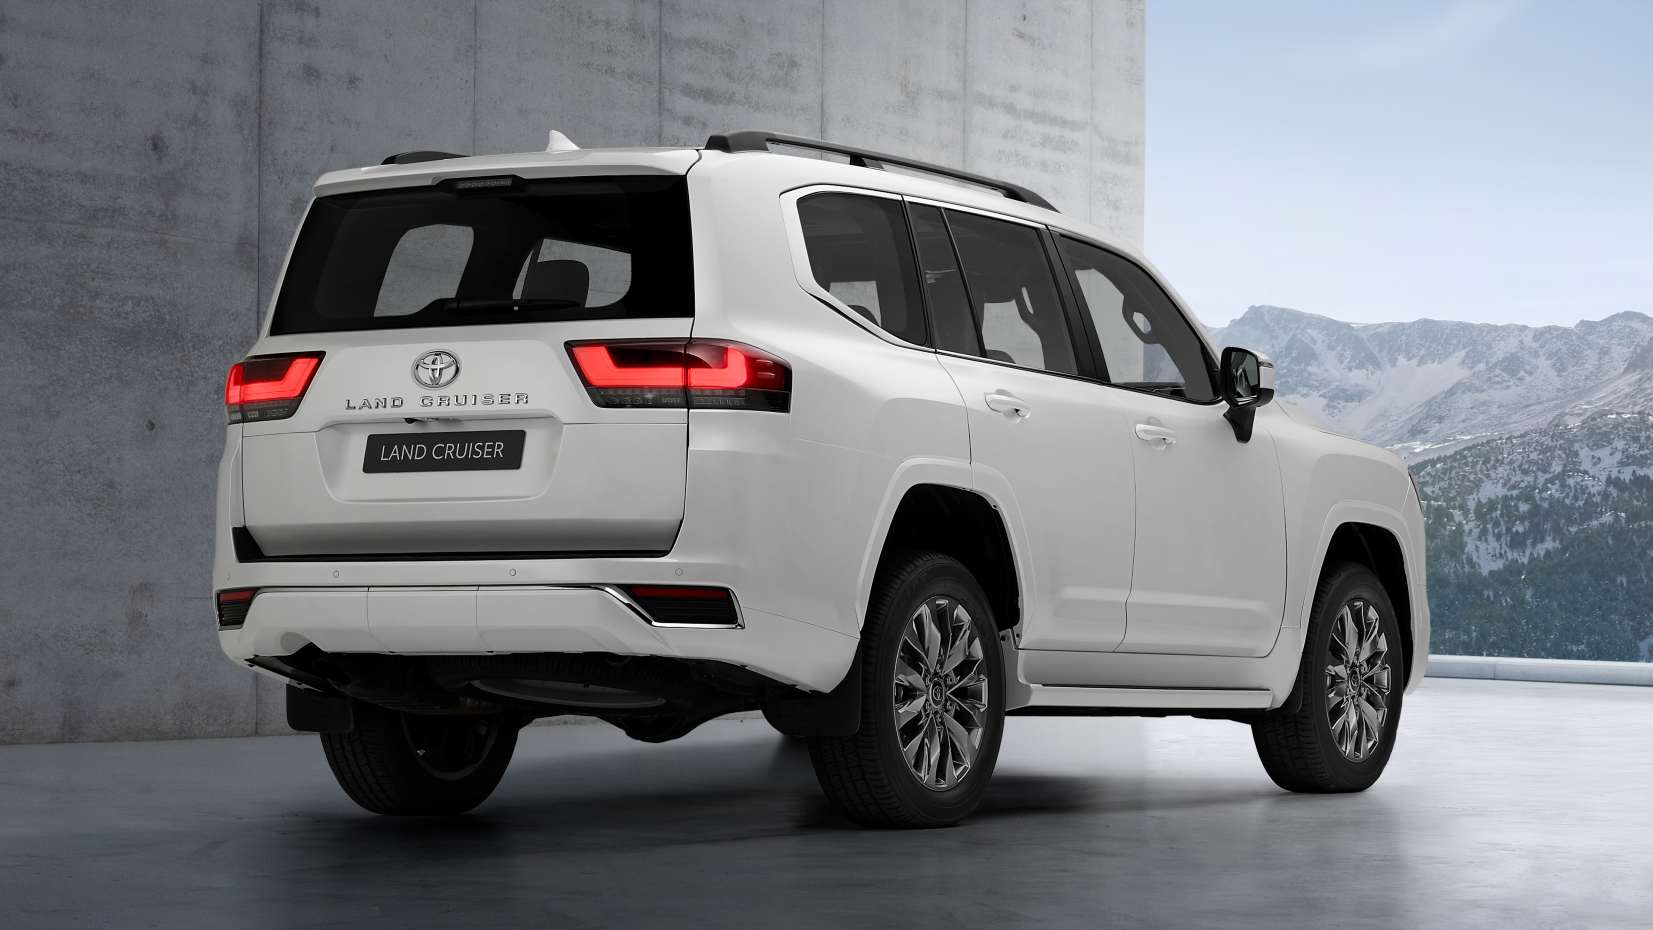 Toyota has given the Land Cruiser LC 300 twin-turbo V6 petrol and diesel engine options. Image: Toyota